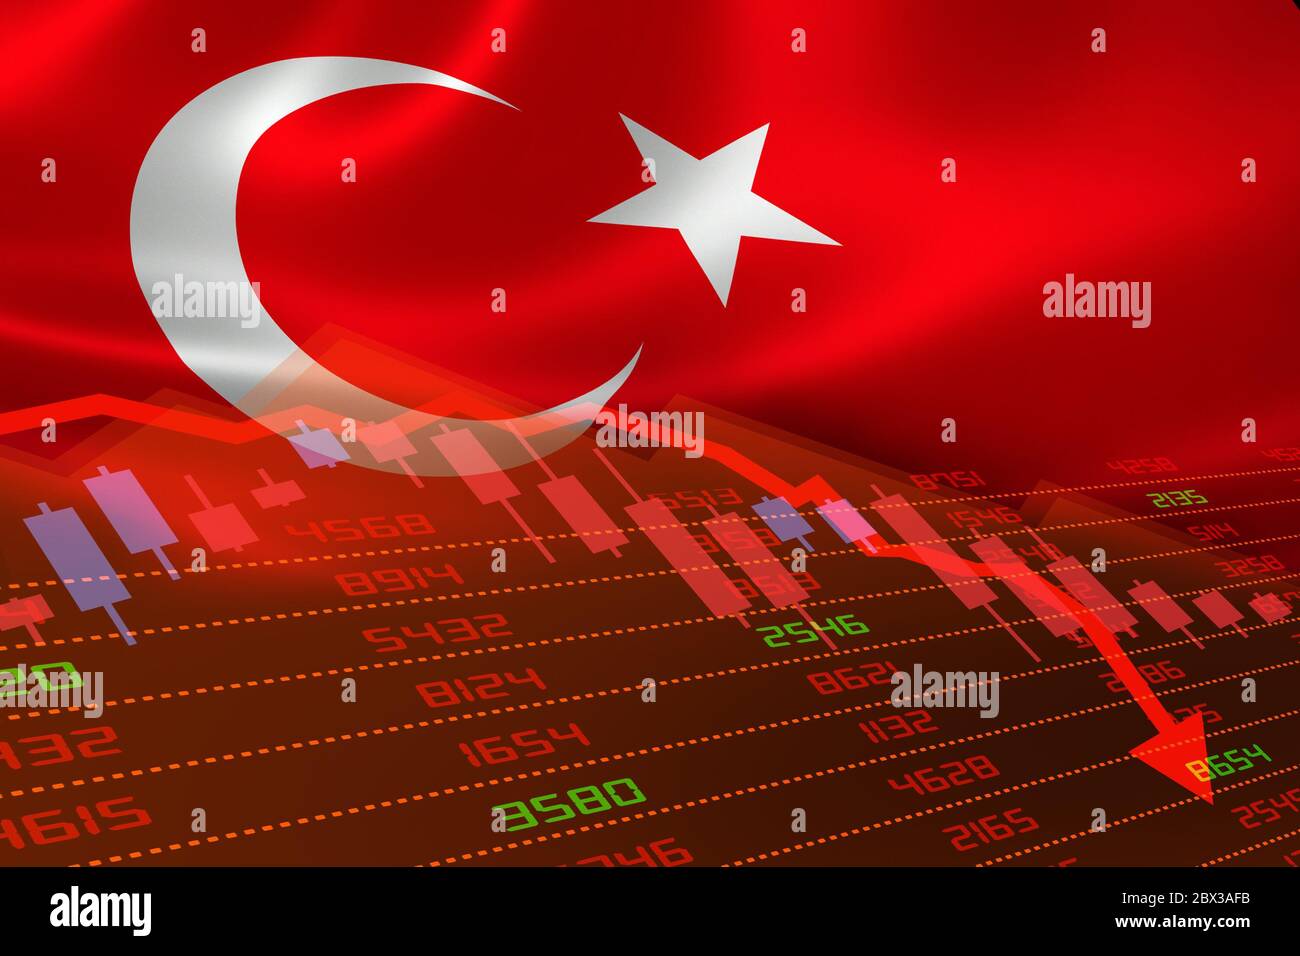 Turkey economic downturn with stock exchange market showing stock chart down and in red negative territory. Business and financial money market crisis Stock Photo